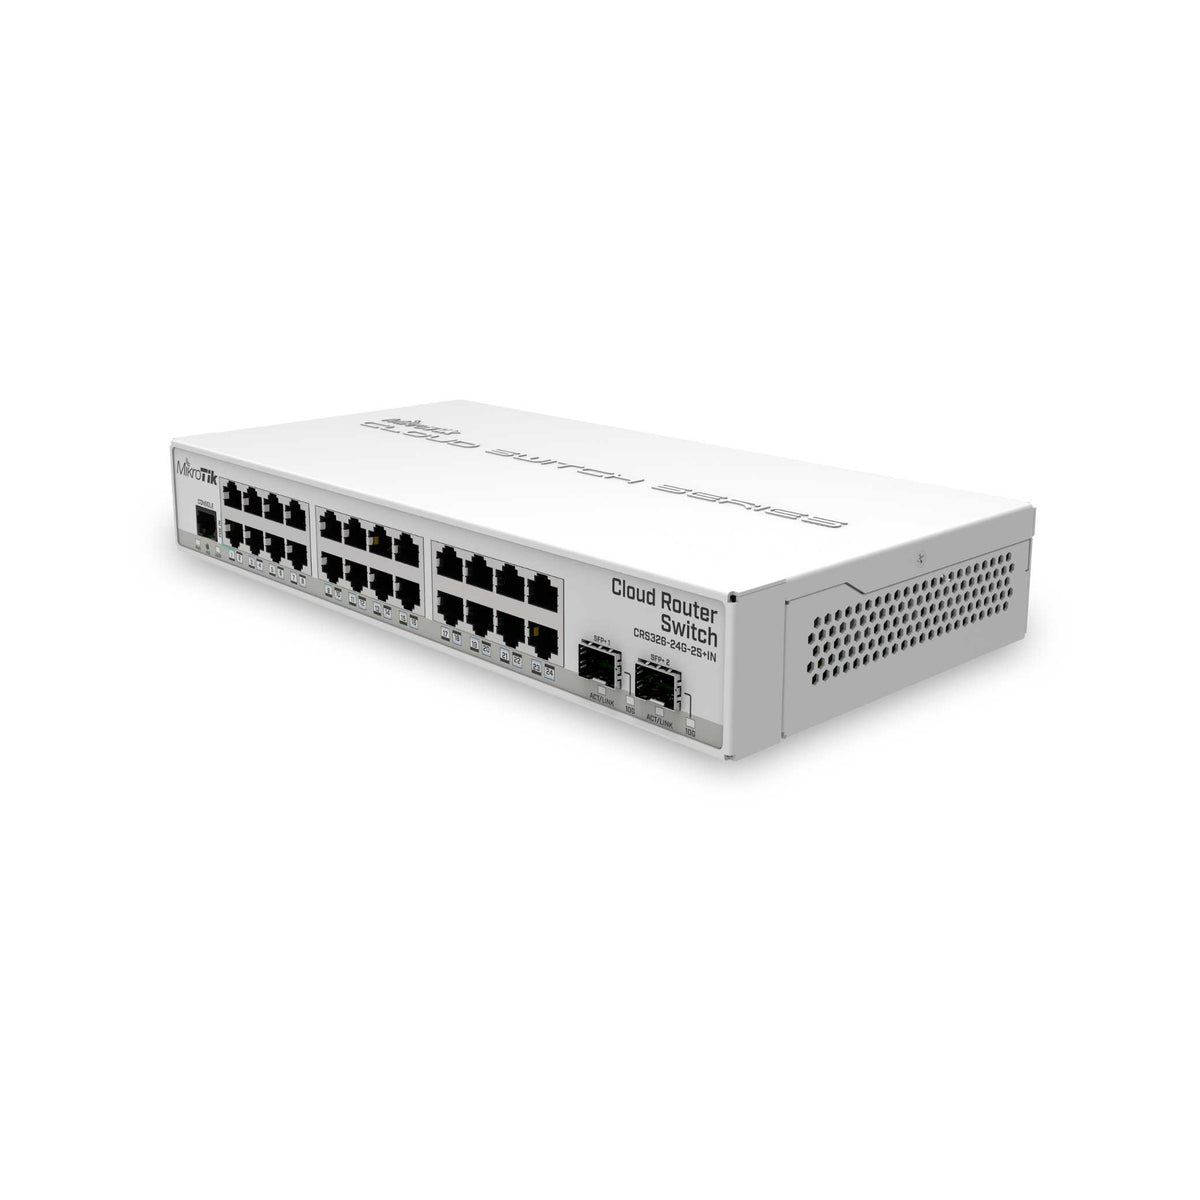 MikroTik CSS326-24G-2S+RM Cloud Smart Switch w/ 24 Gigabit Ports and 2 SFP+  Cages